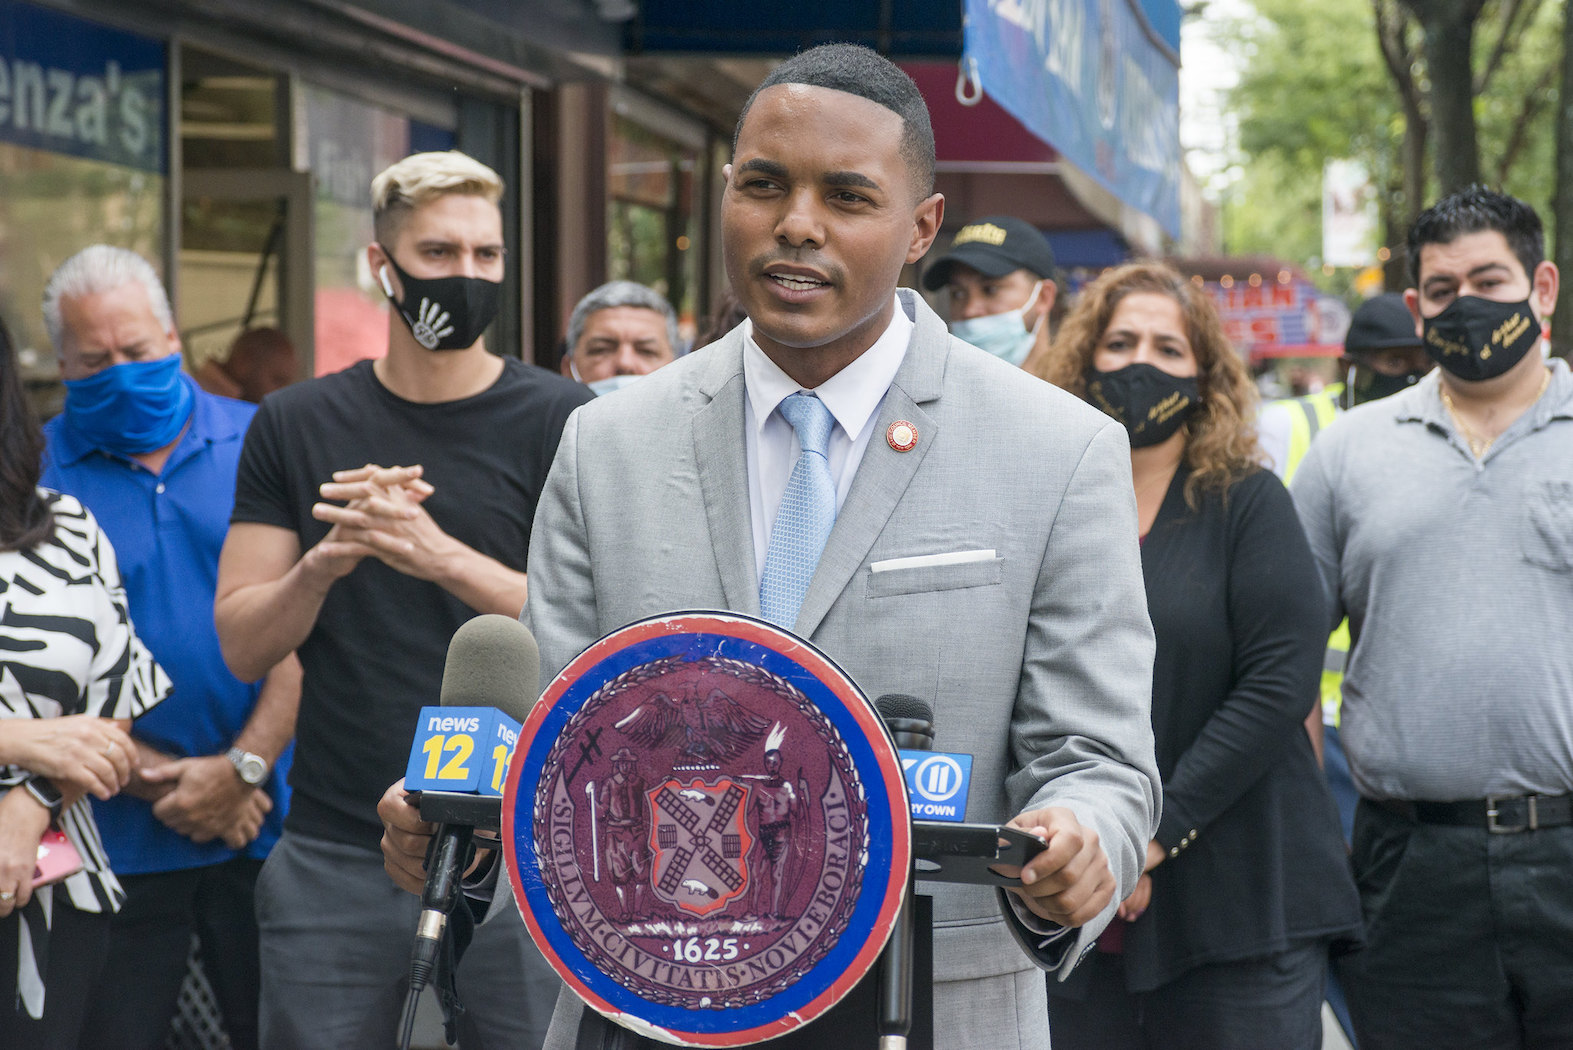 Council Member Ritchie Torres has opened up about his struggles with mental health.